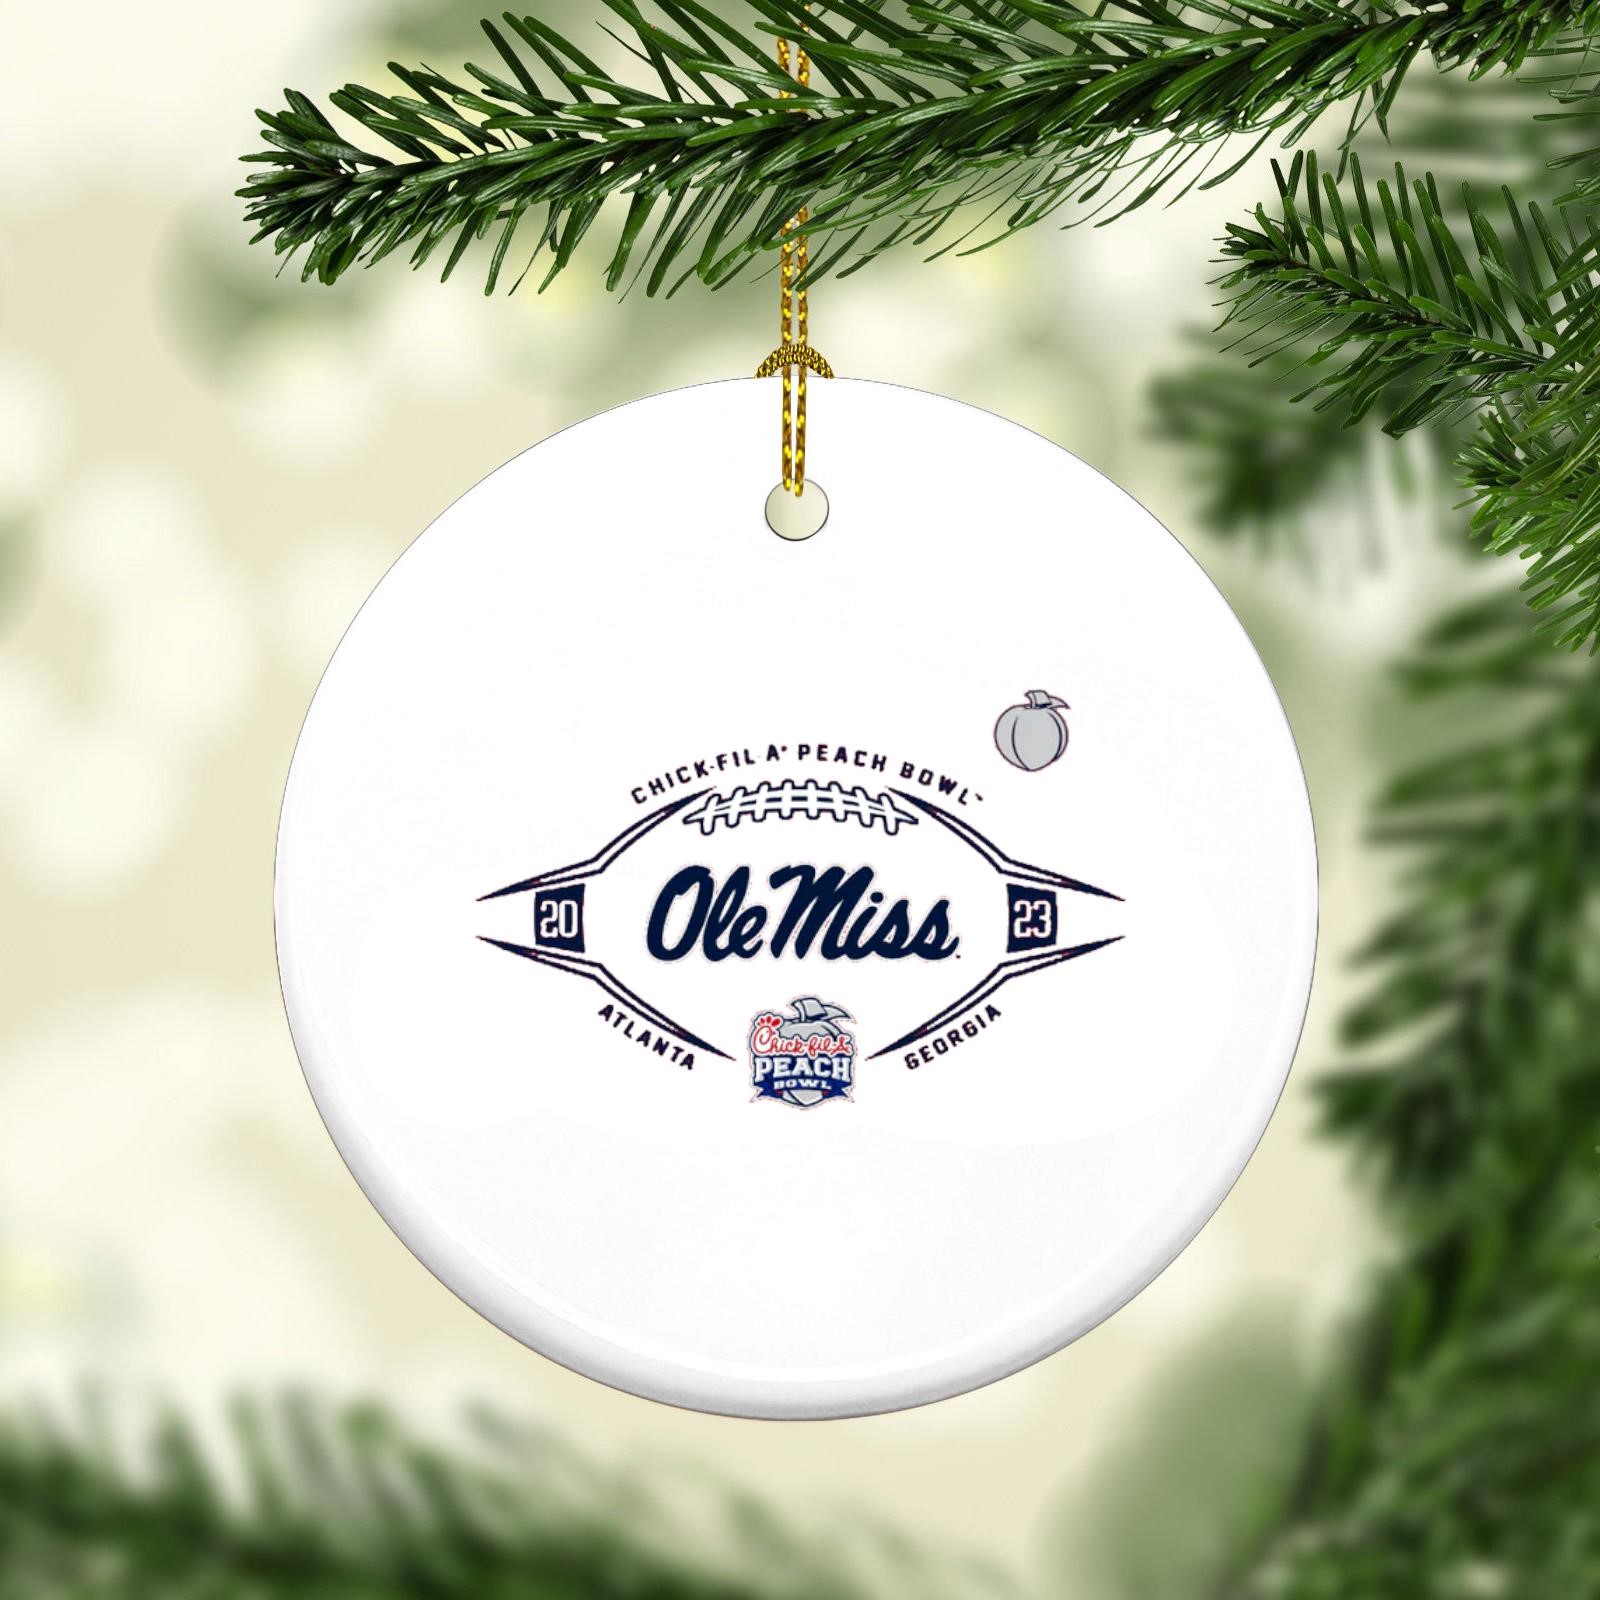 https://images.nicefrogtees.com/2023/12/Ole-Miss-Rebels-2023-Chick-fil-A-Peach-Bowl-ornament-Christmas-Ornament.jpg